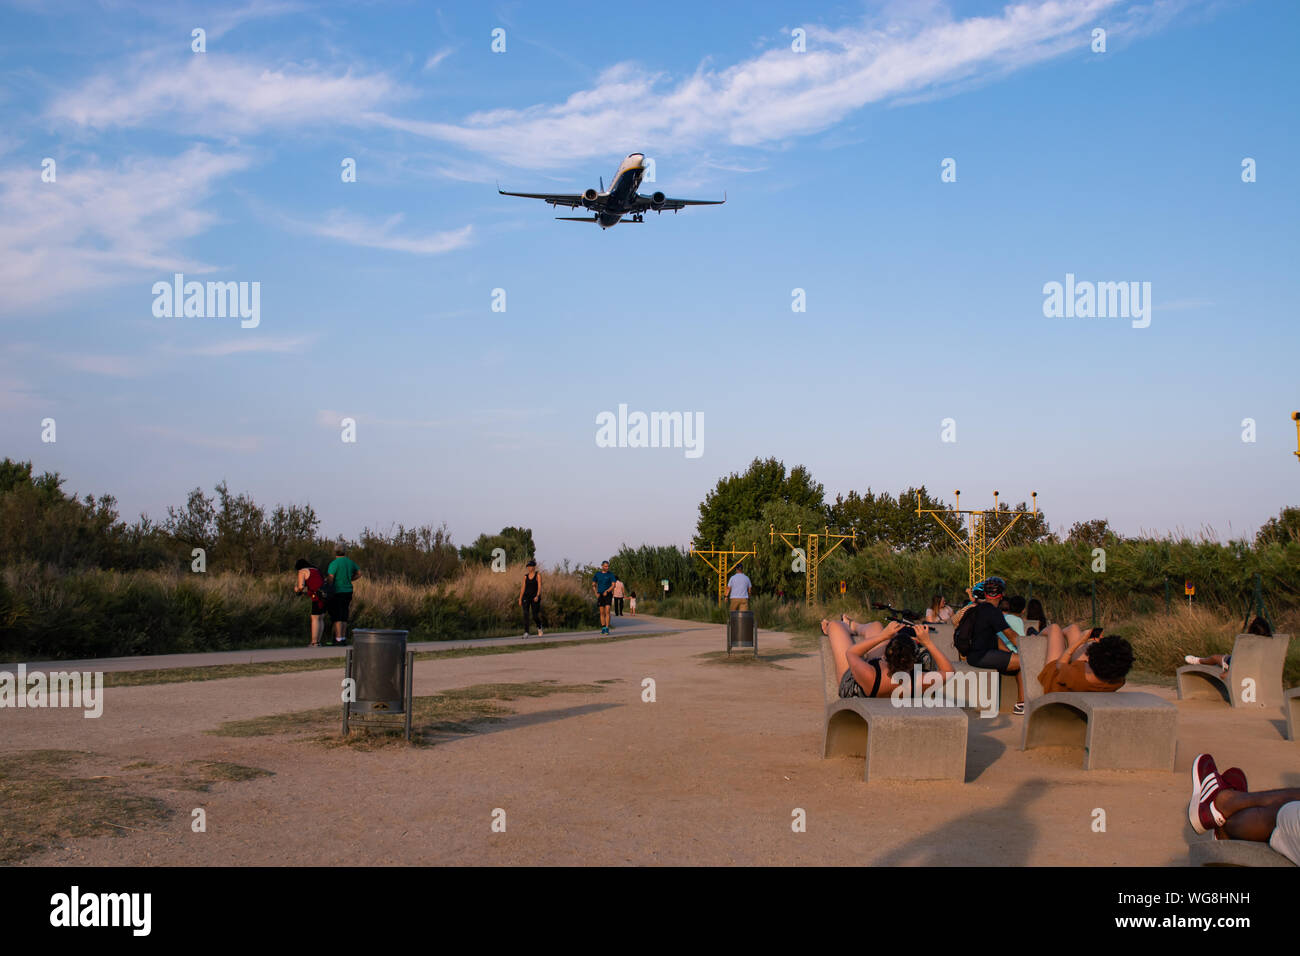 Barcelona, Spain - August 30, 2019: People watching and taking pictures of a landing aircraft from the runway viewpoint of Barcelona El Prat airport Stock Photo